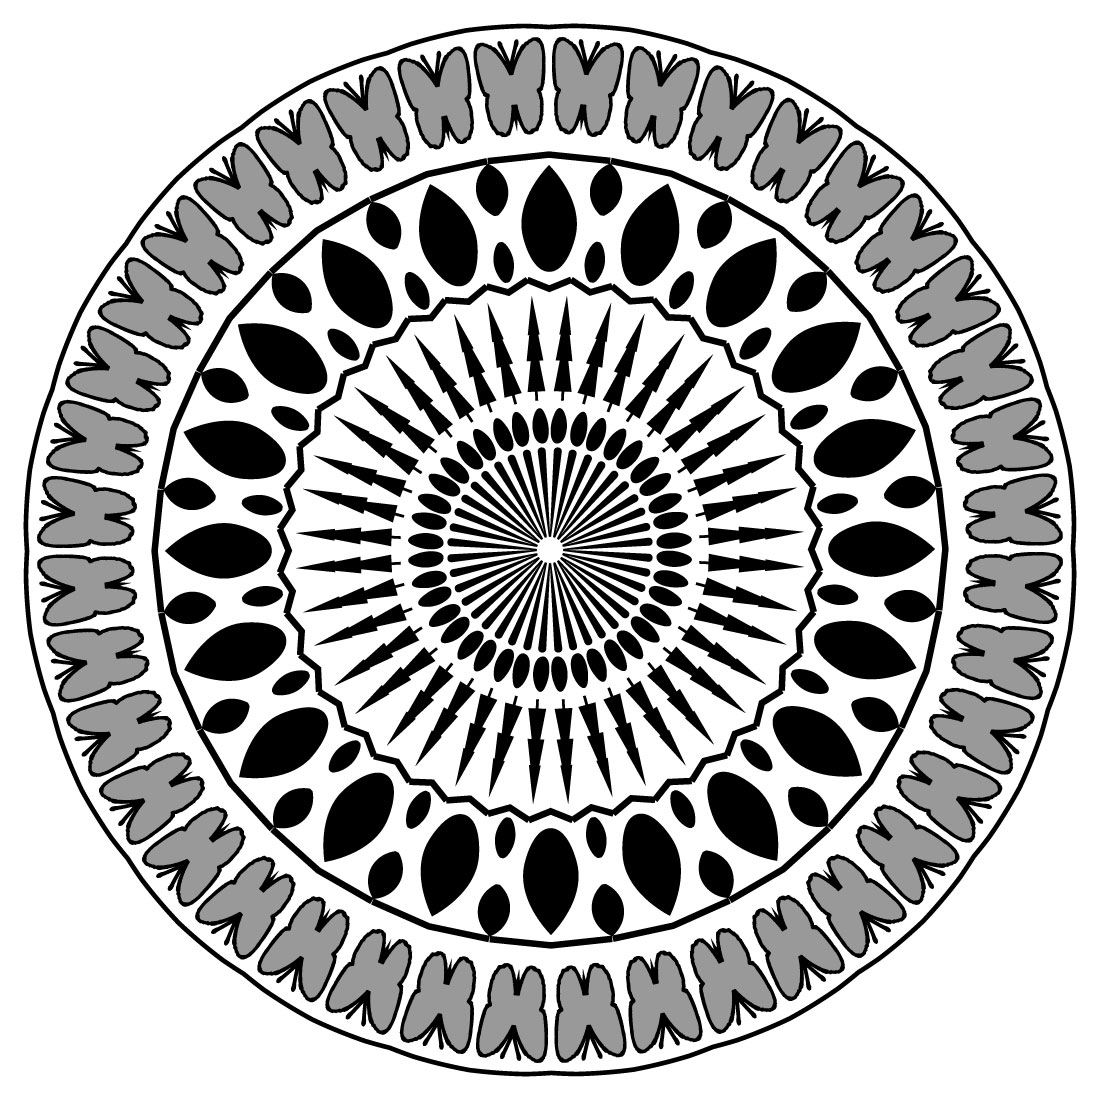 Mandala Art Butterfly with black and white preview image.